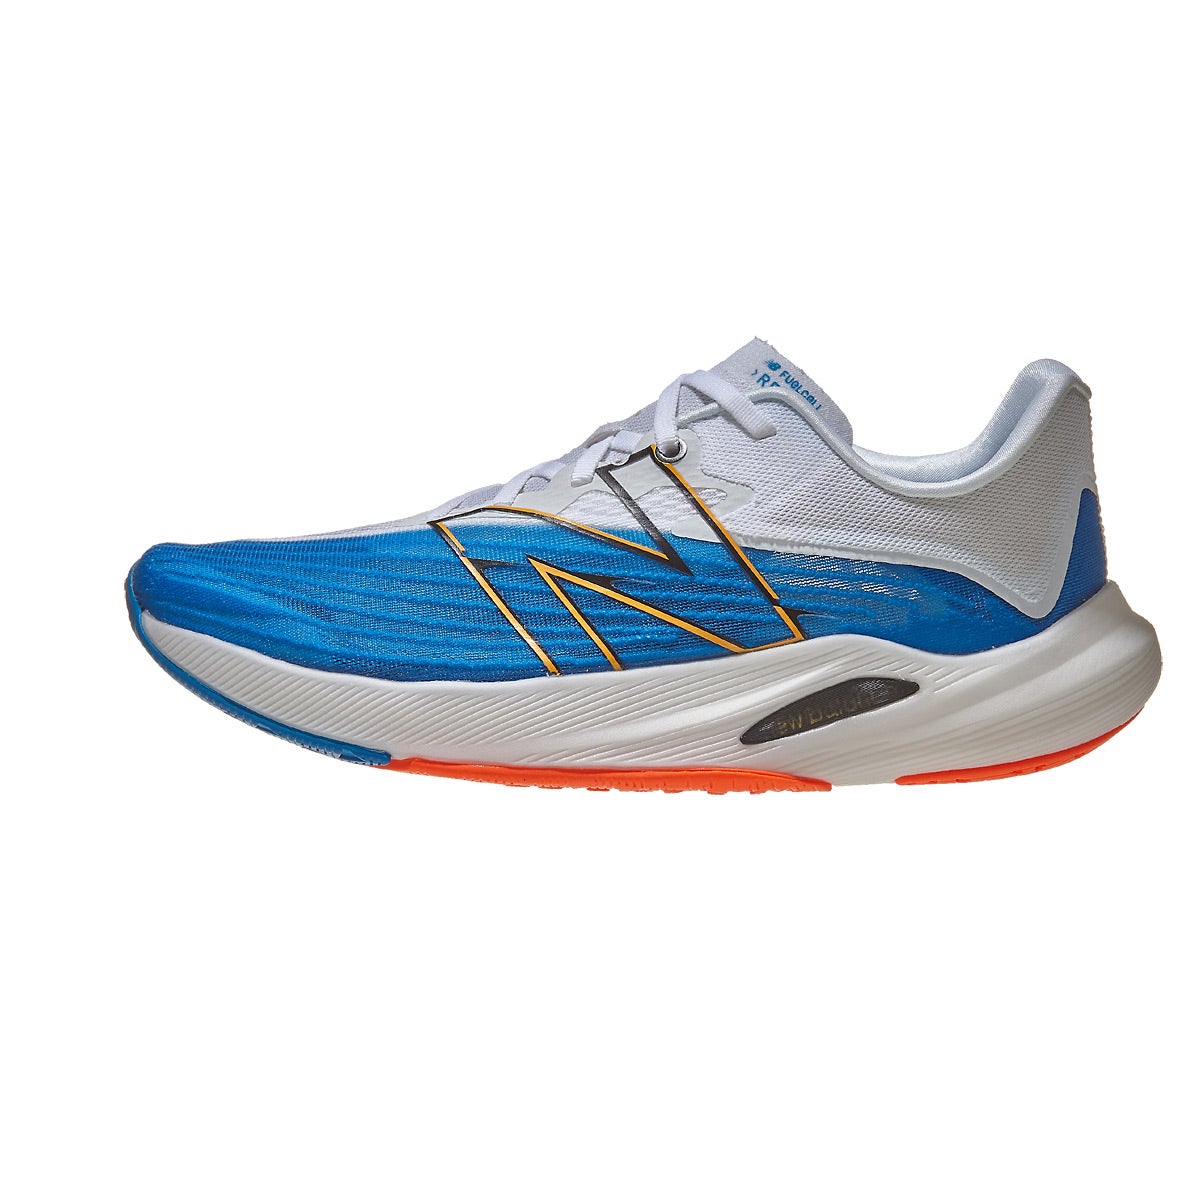 New Balance FuelCell Rebel v2 Men's Shoes Laser Blue/Wh 360° View ...